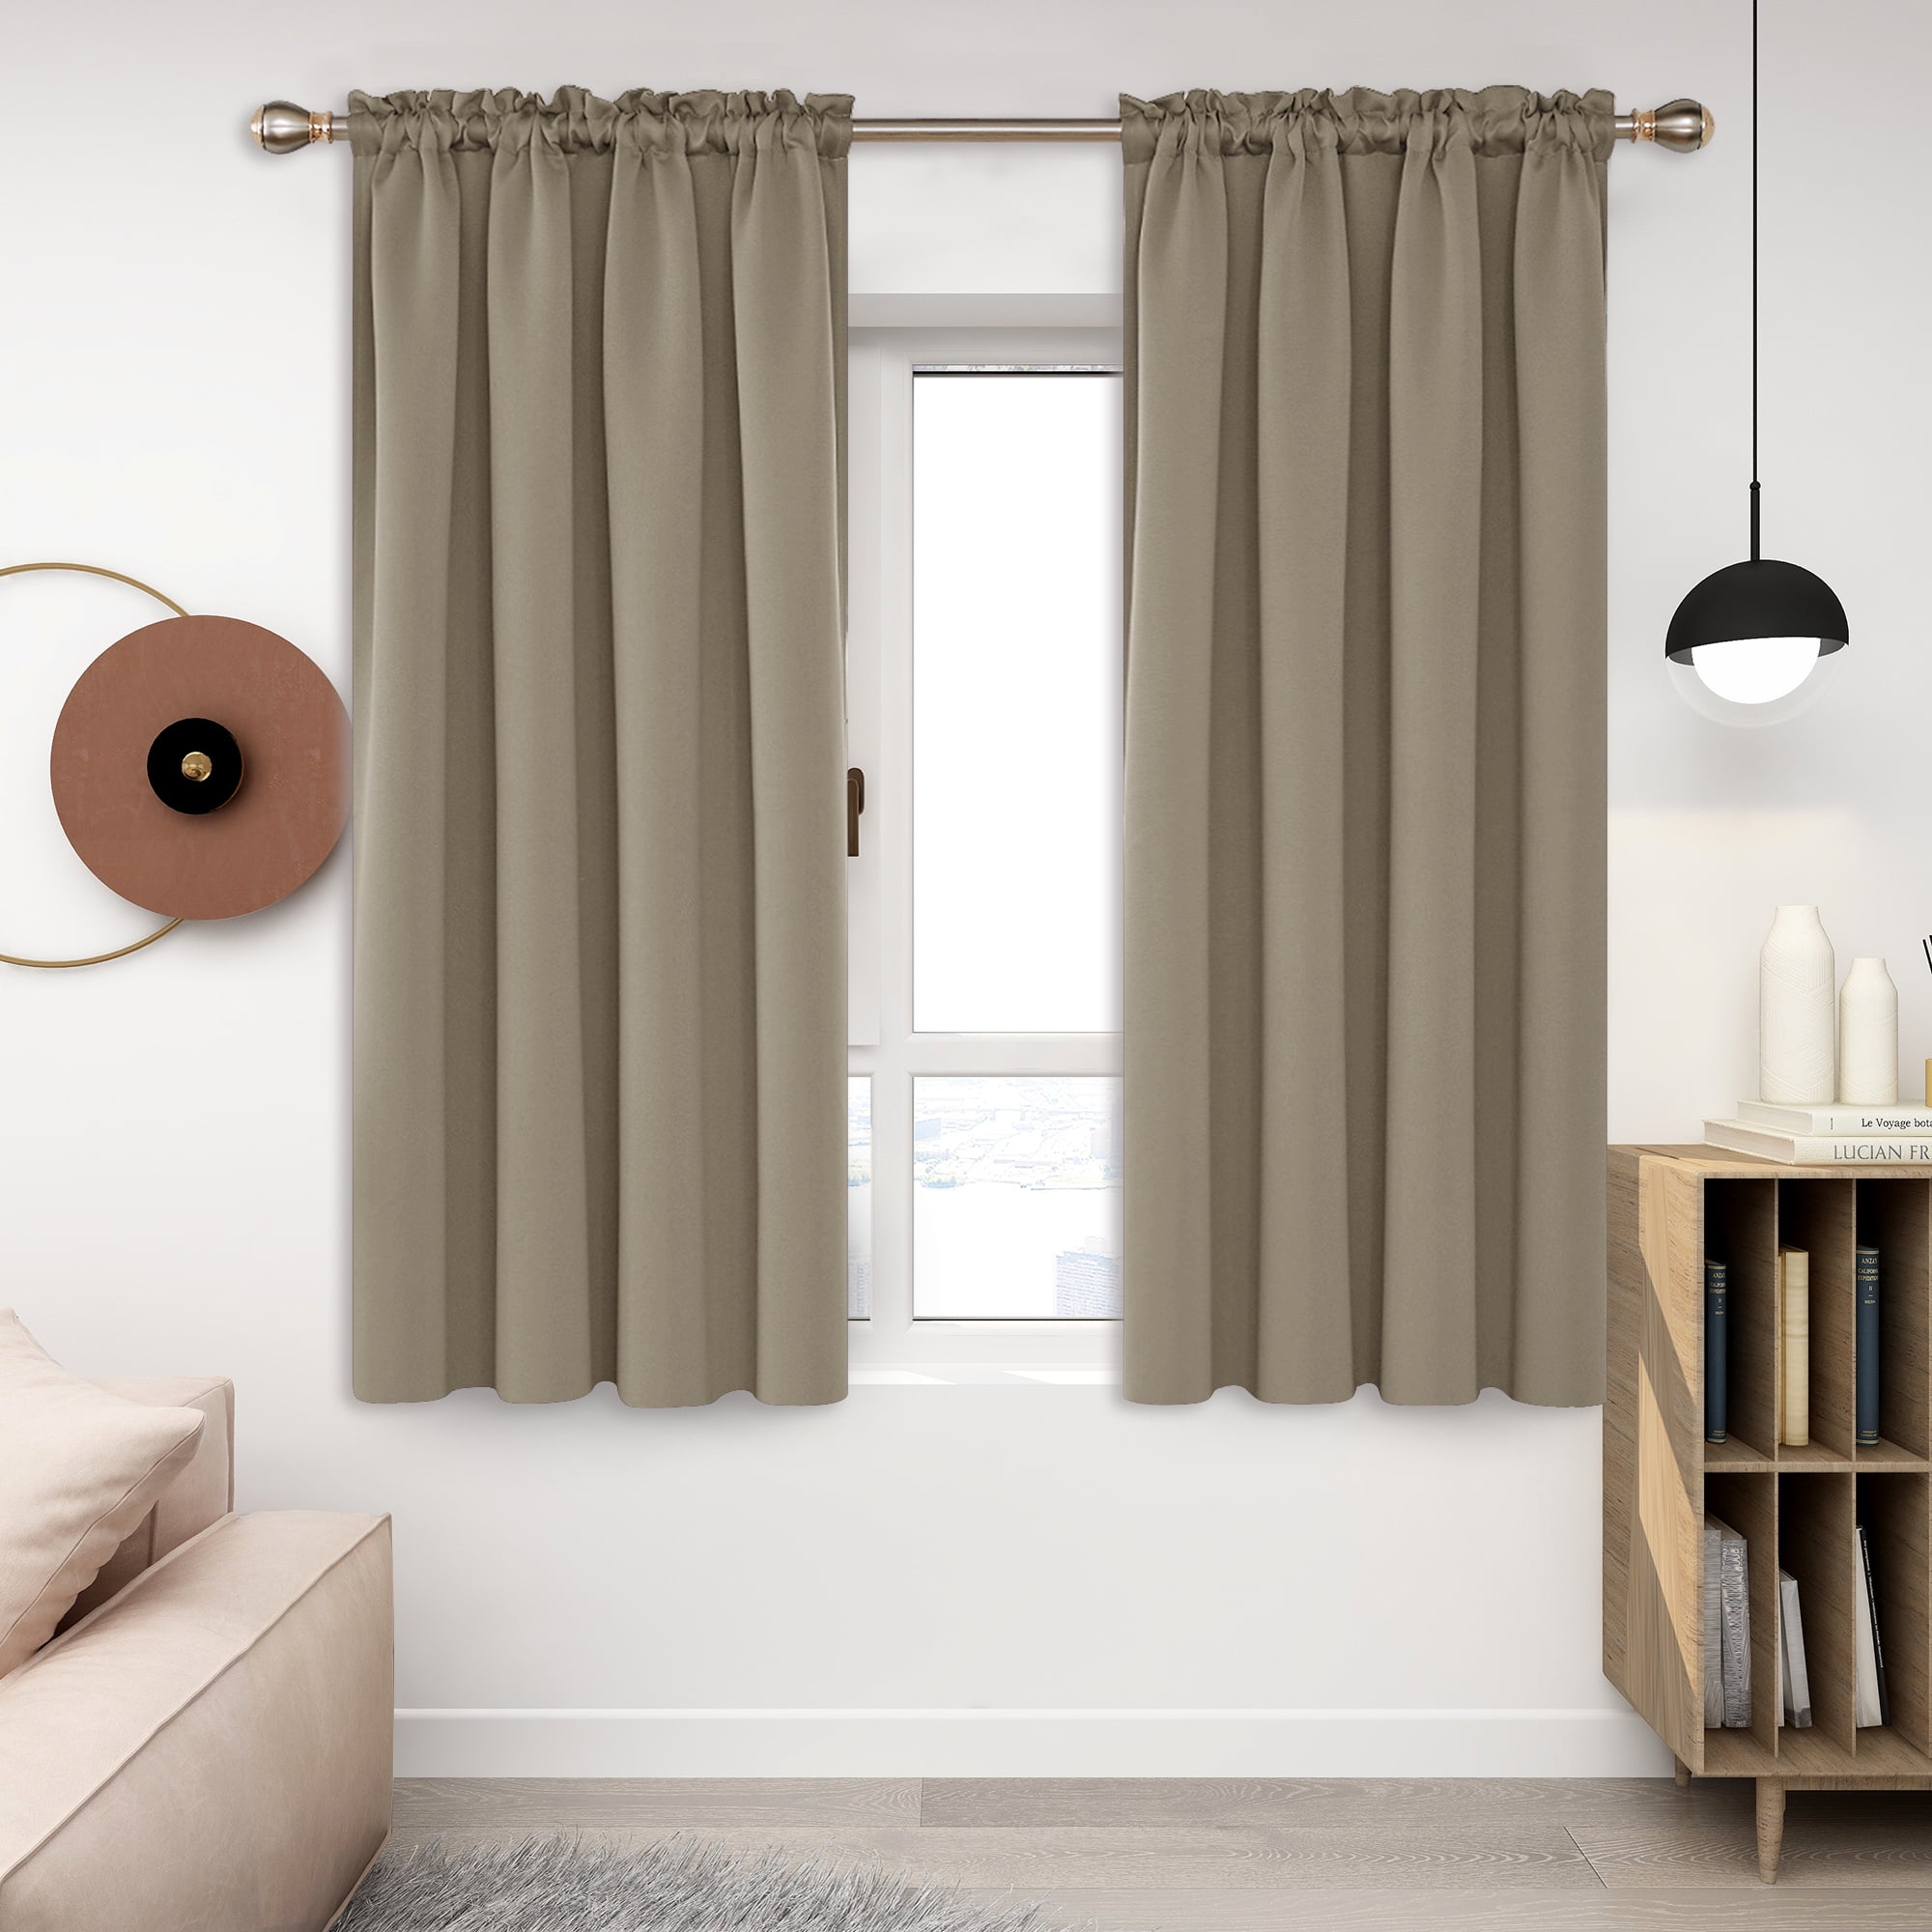 Cream Premium Modern Pair Fully Lined Ring Top Curtain Drapes Machine Washable 